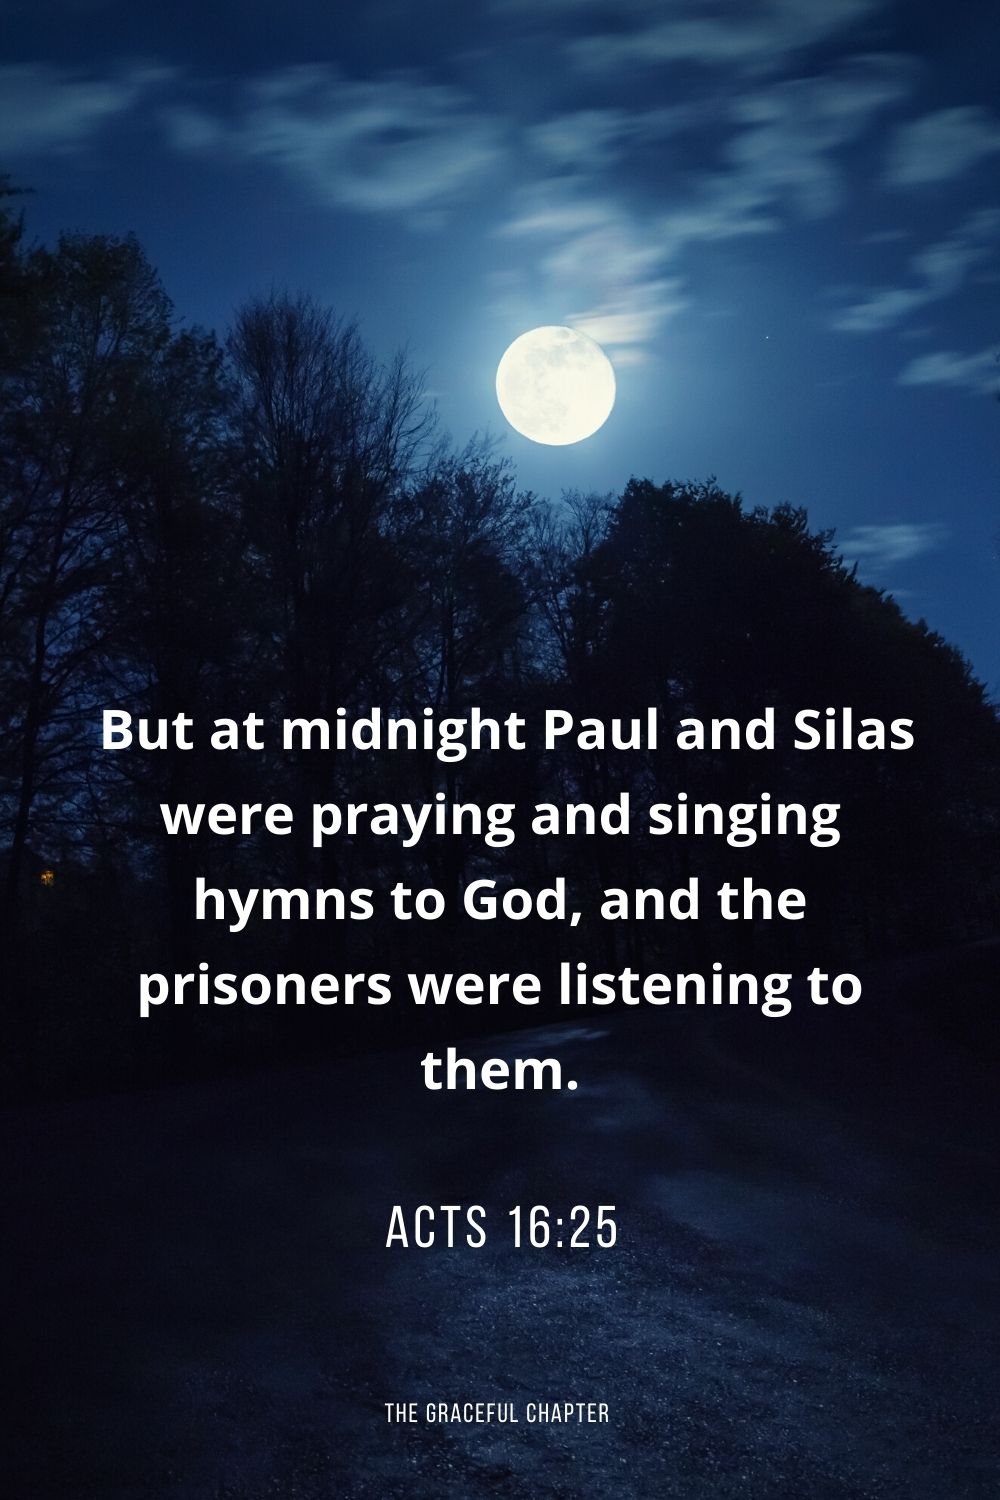  But at midnight Paul and Silas were praying and singing hymns to God, and the prisoners were listening to them. Acts 16:25